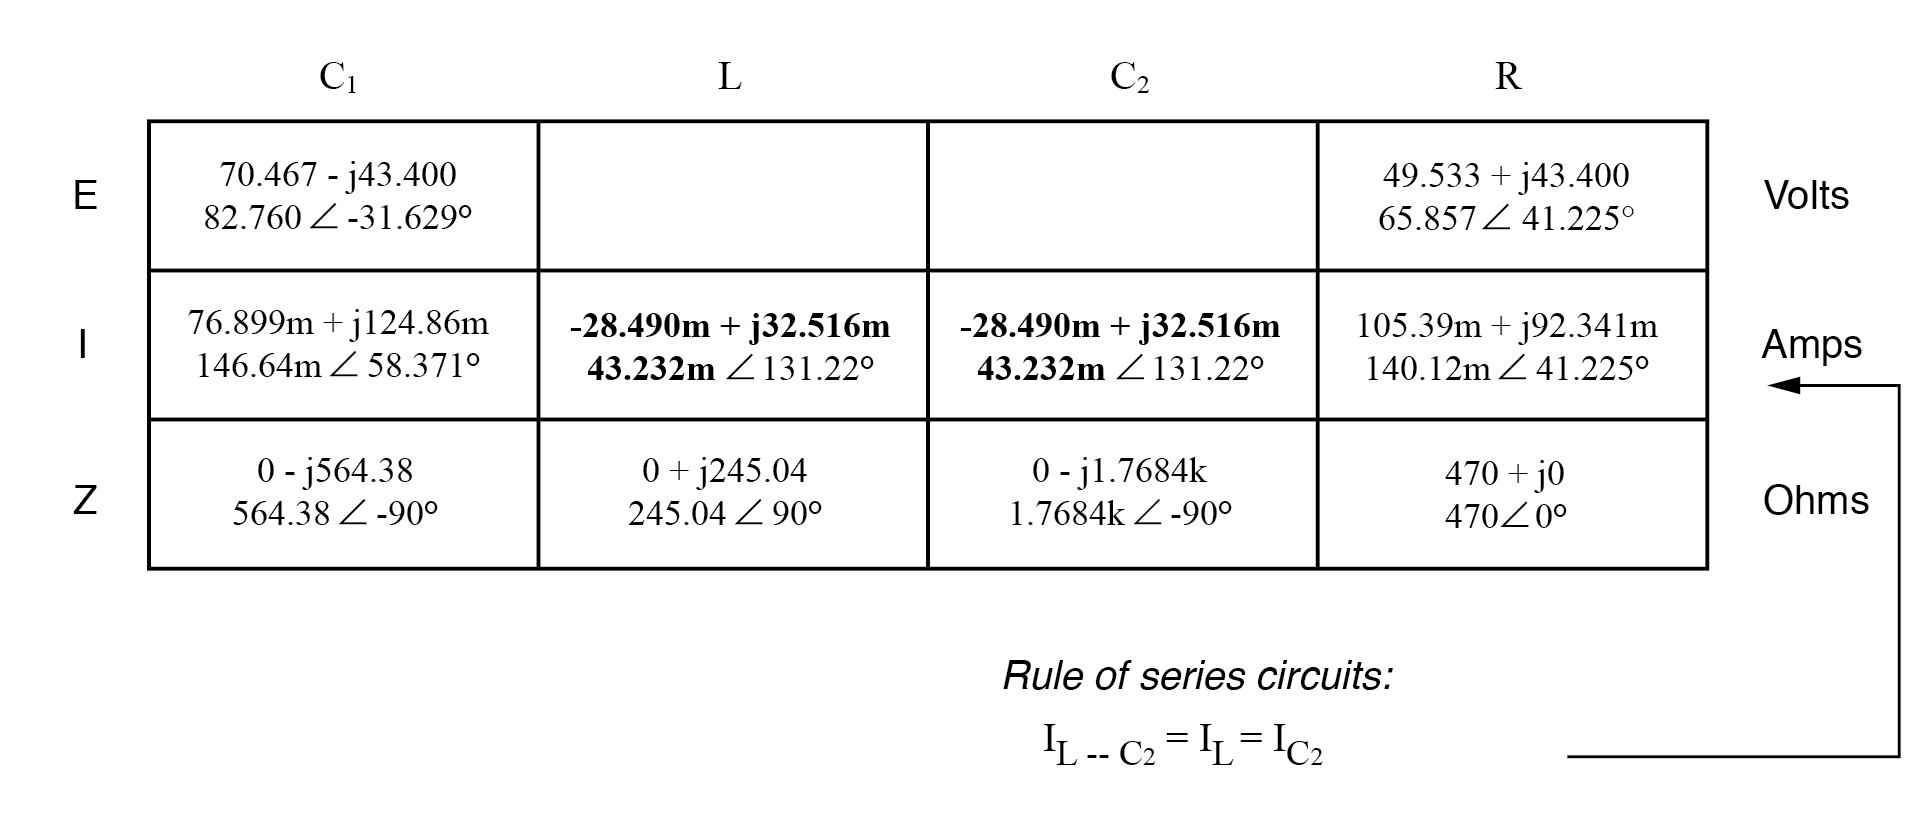 rule of series circuits table 1